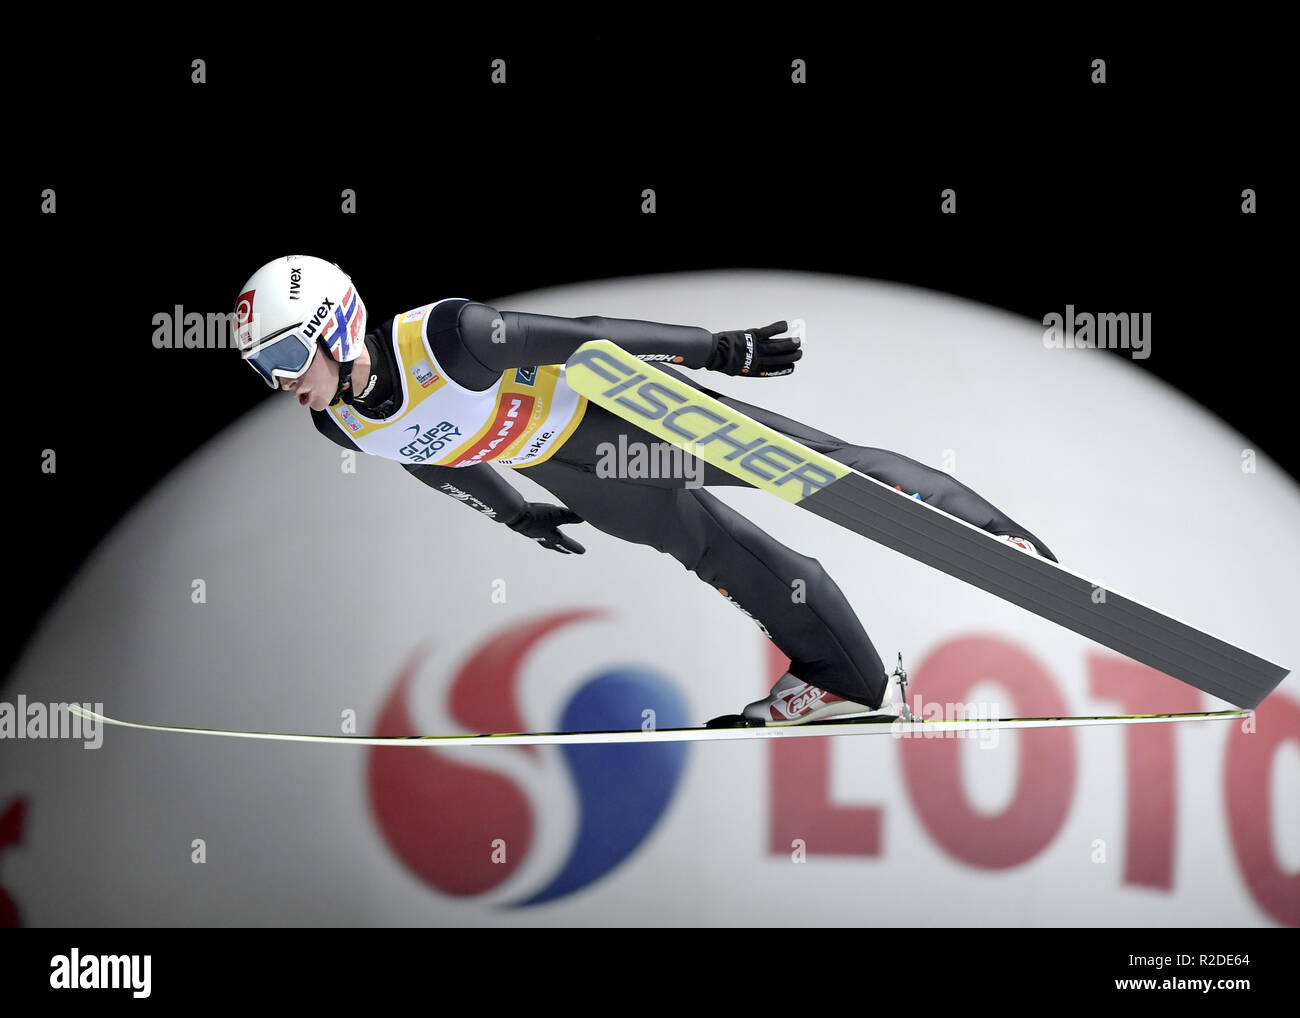 Anders Fannemel  World Cup FIS Ski Jumping on November 17, 2018 in Wisla, Poland. Stock Photo